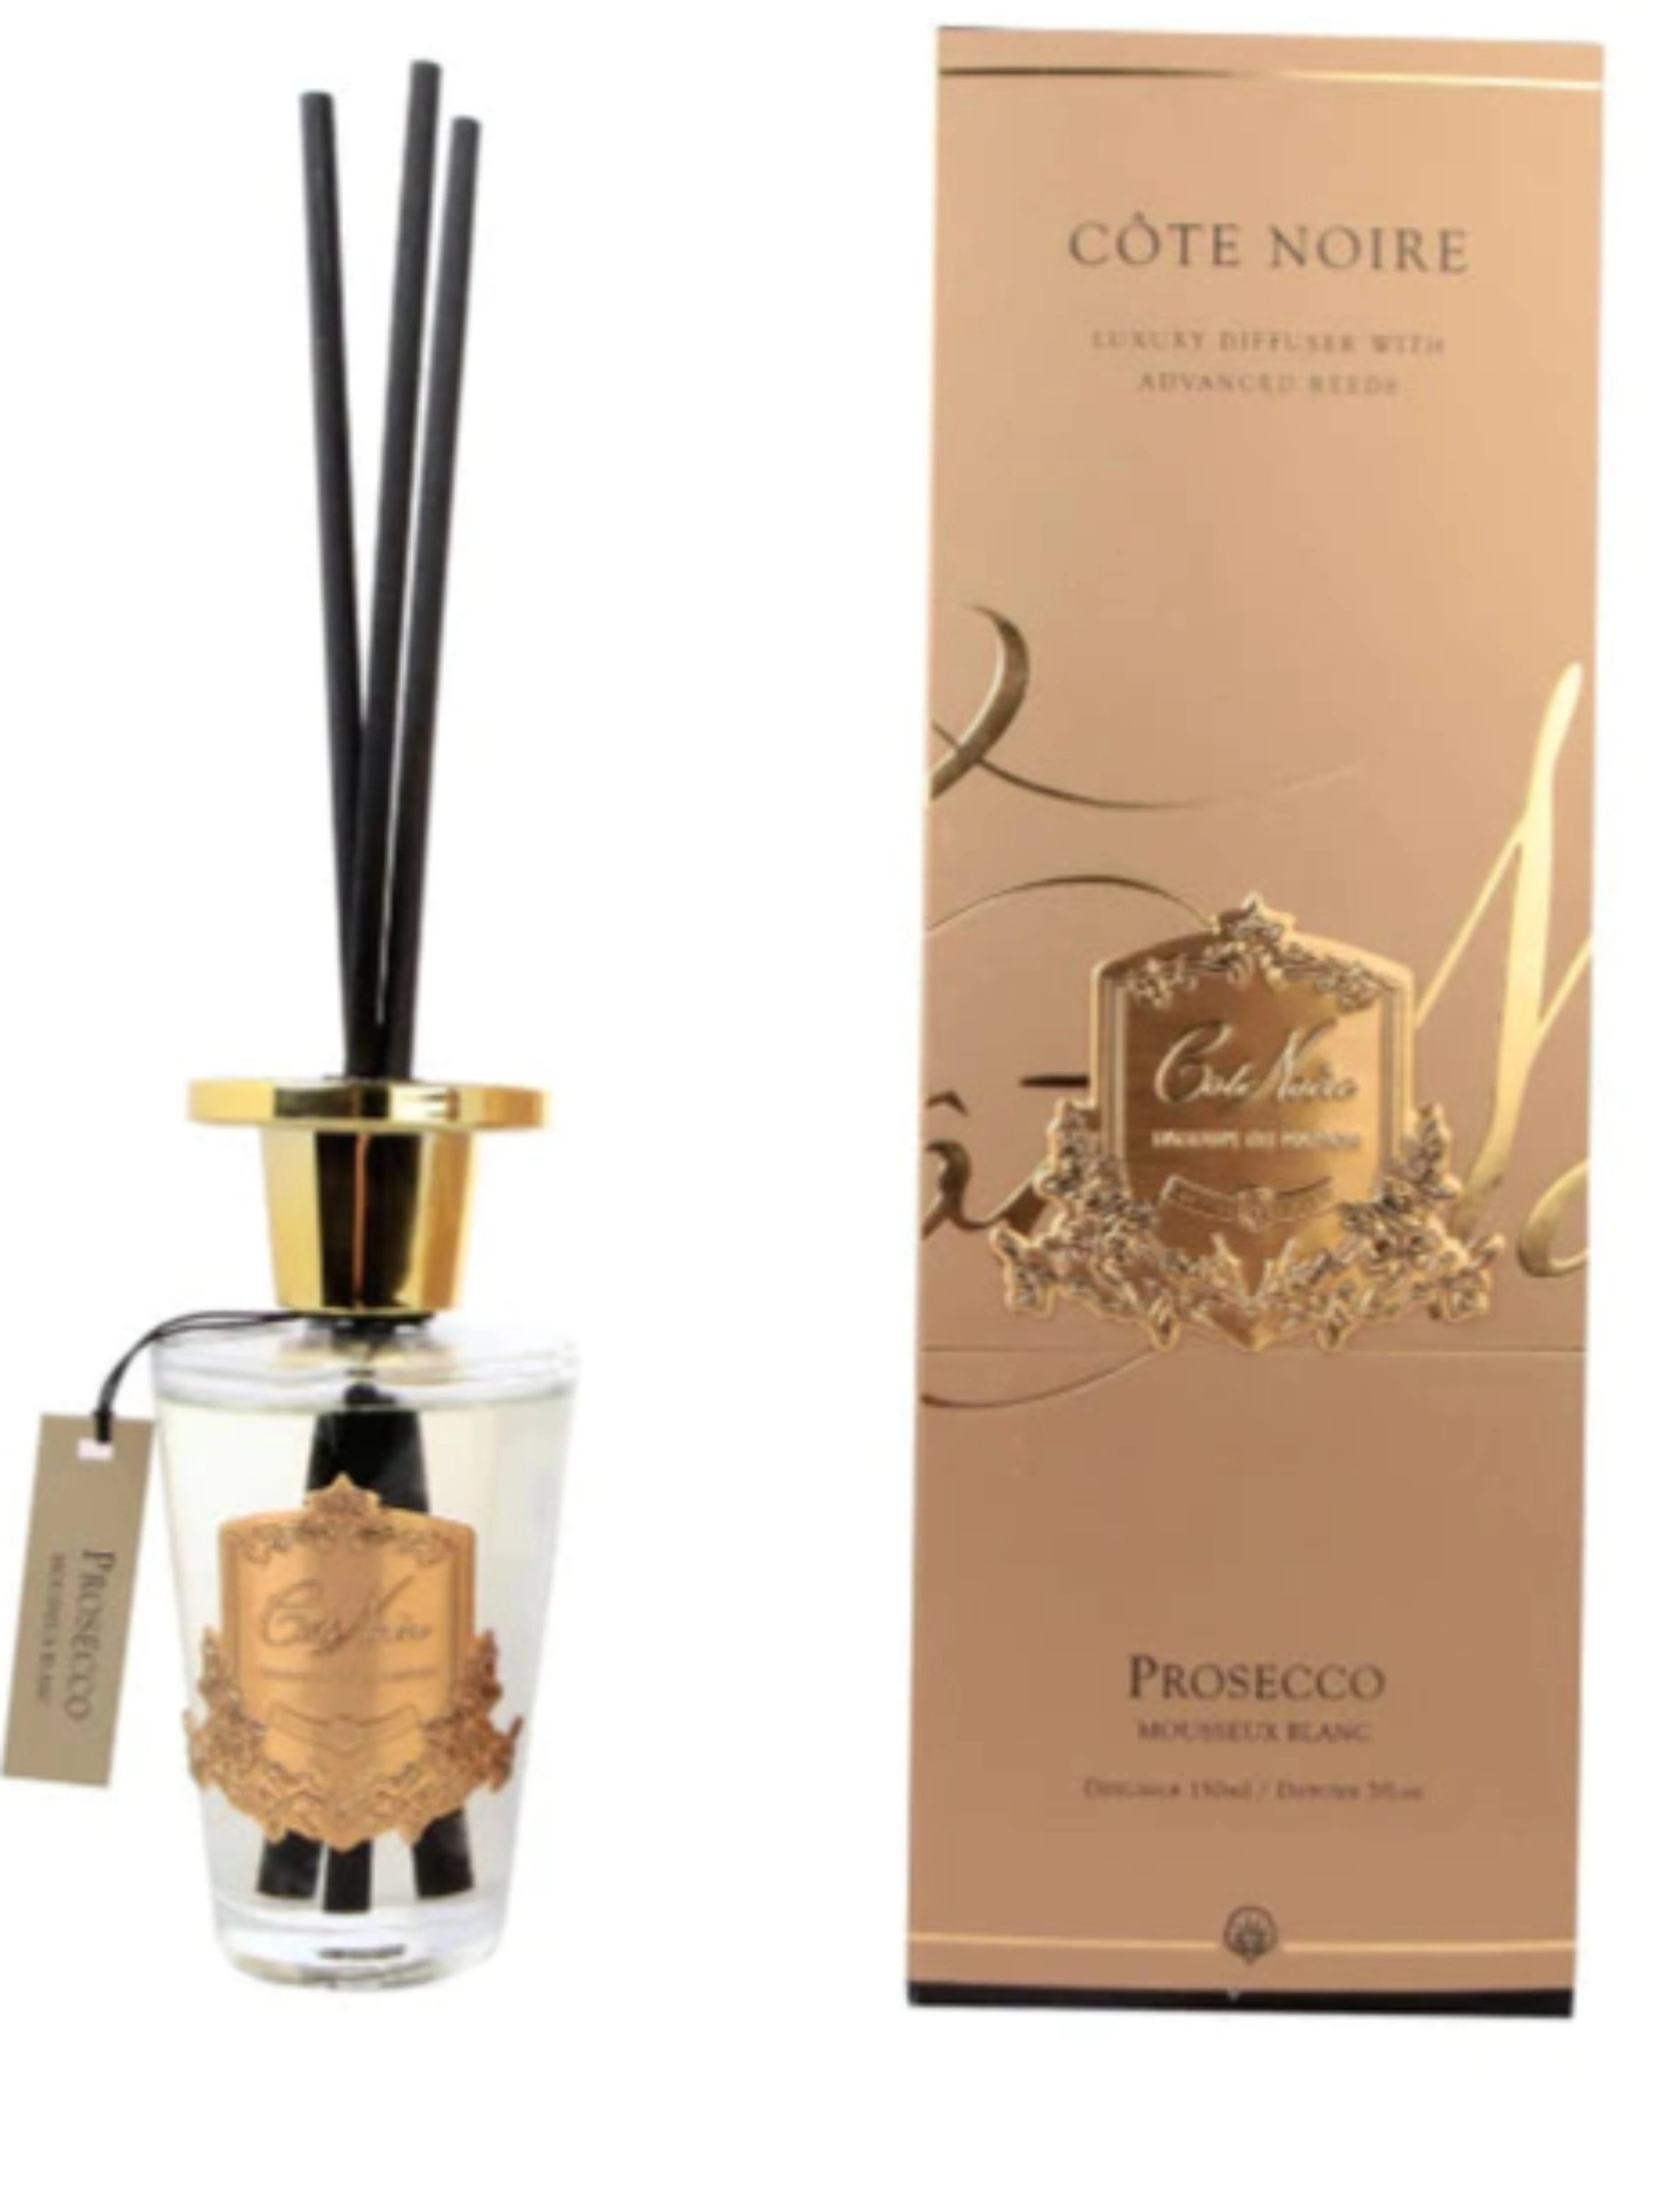 Côte Noire Prosecco Gold Reed Diffuser